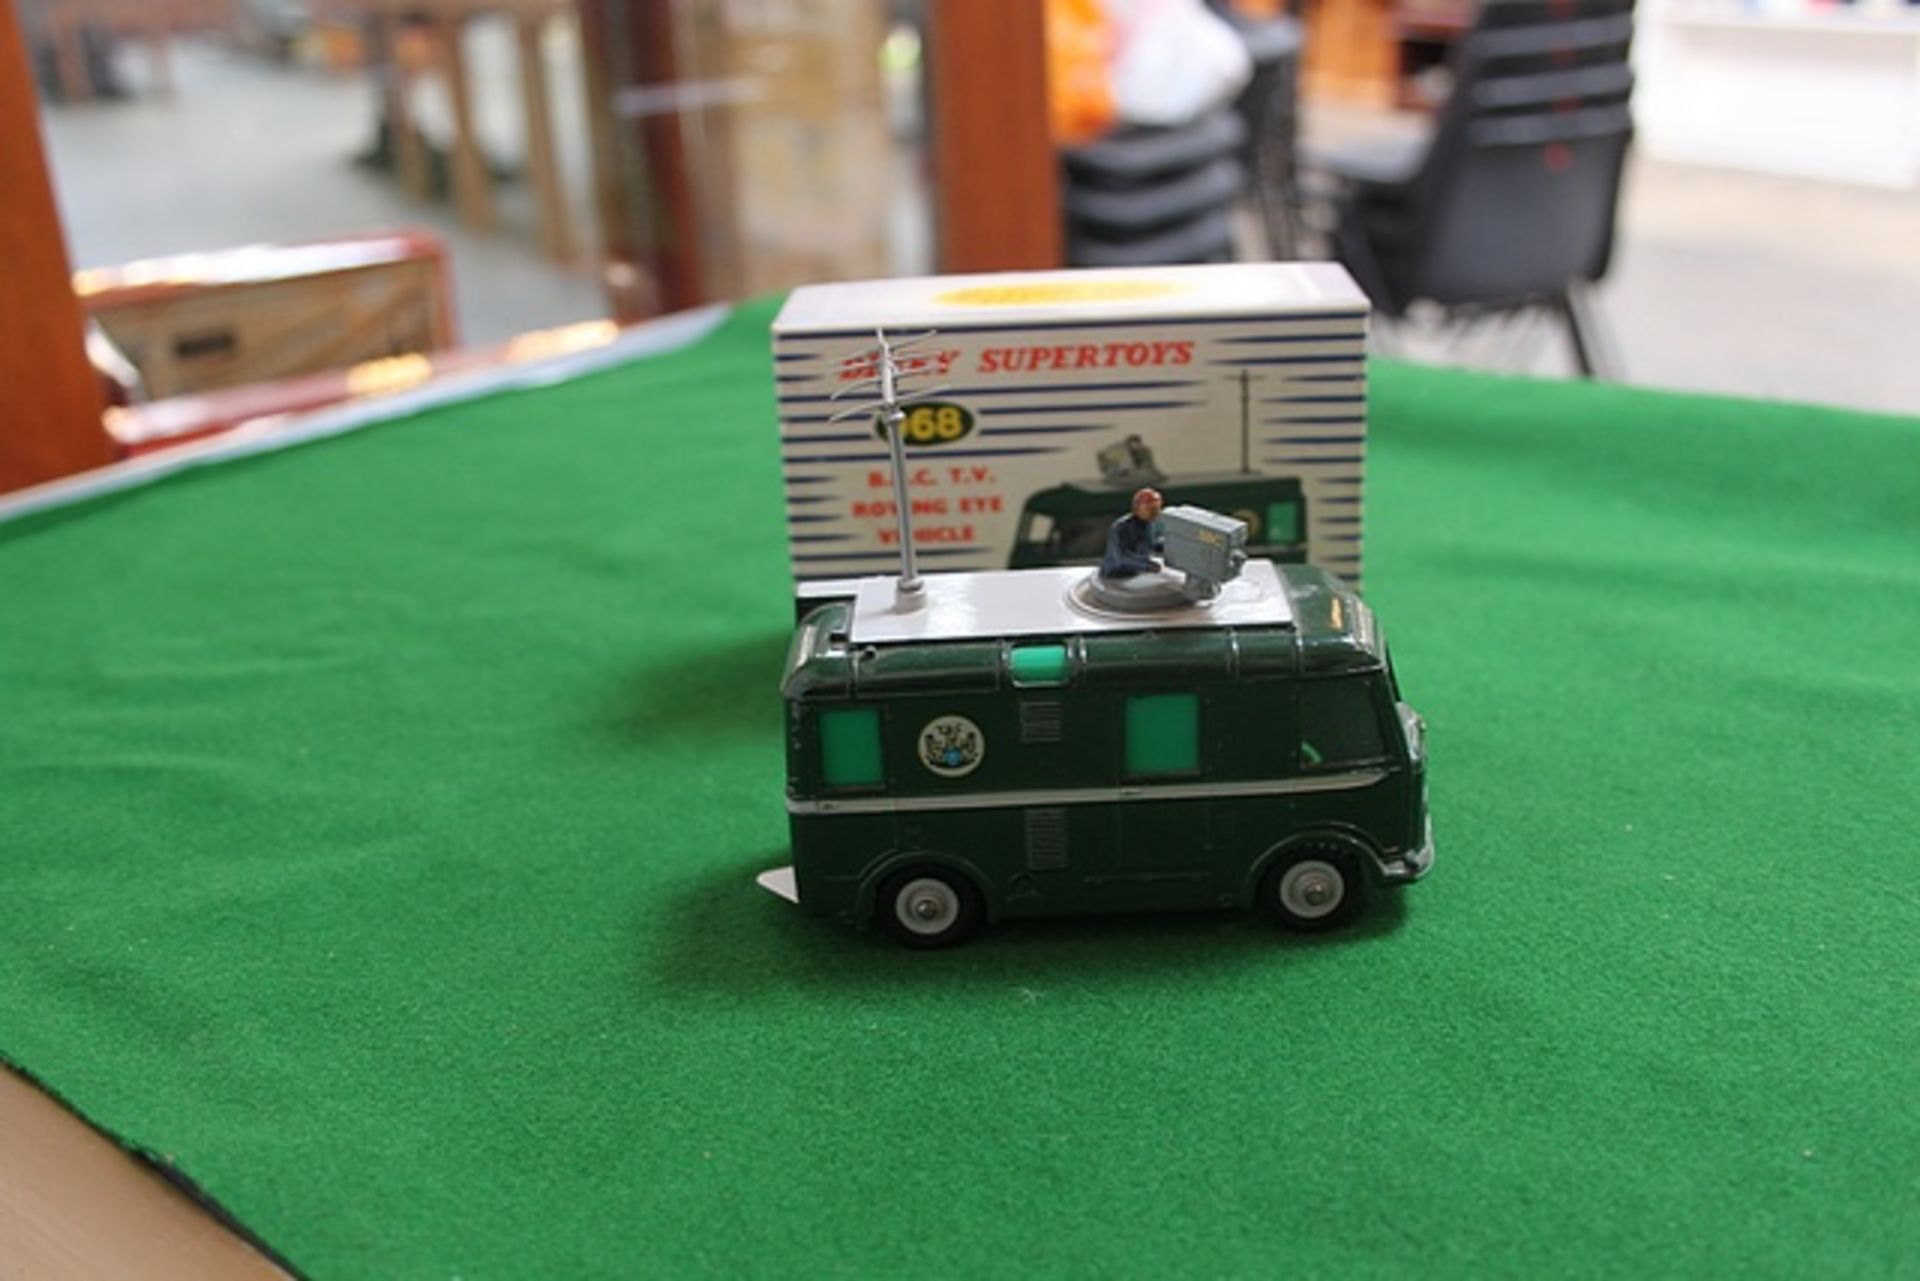 Dinky Toys #968 BBC TV Roving Eye Vehicle Complete With Box - Image 3 of 4